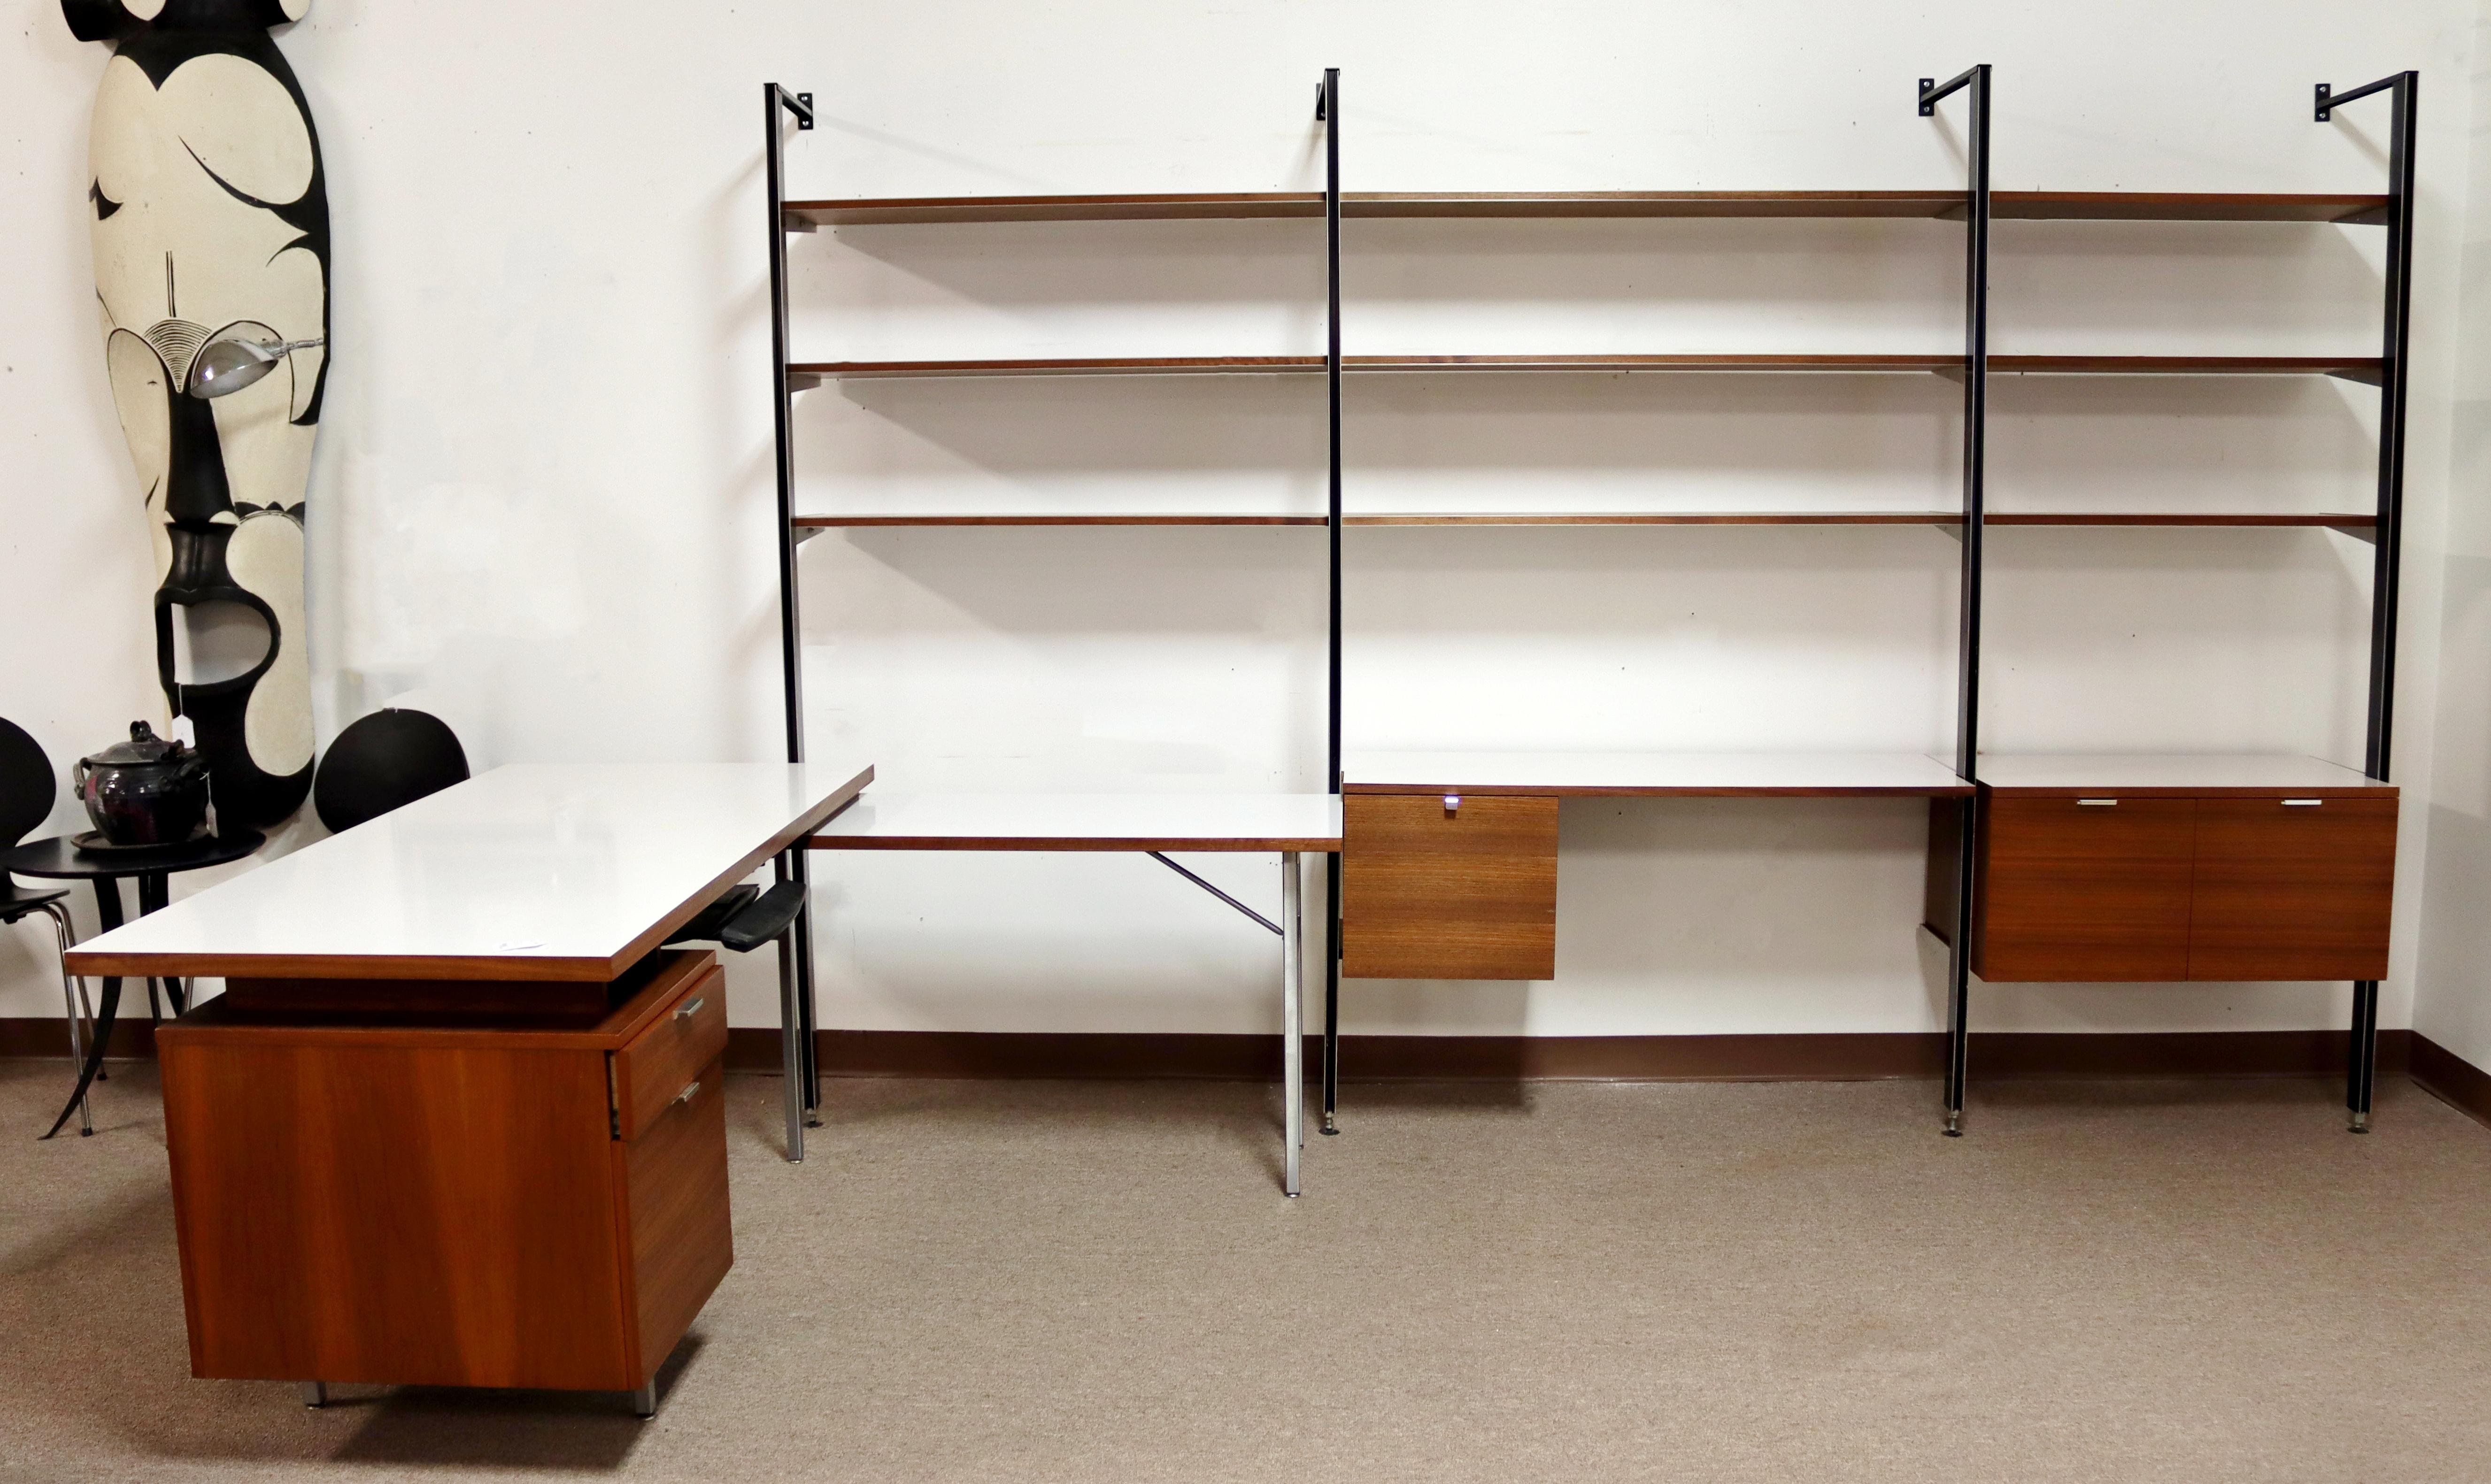 For your consideration is an incredible wall unit, with a laminate desk return, by George Nelson, circa the 1960s. In excellent vintage condition. The dimensions are 146